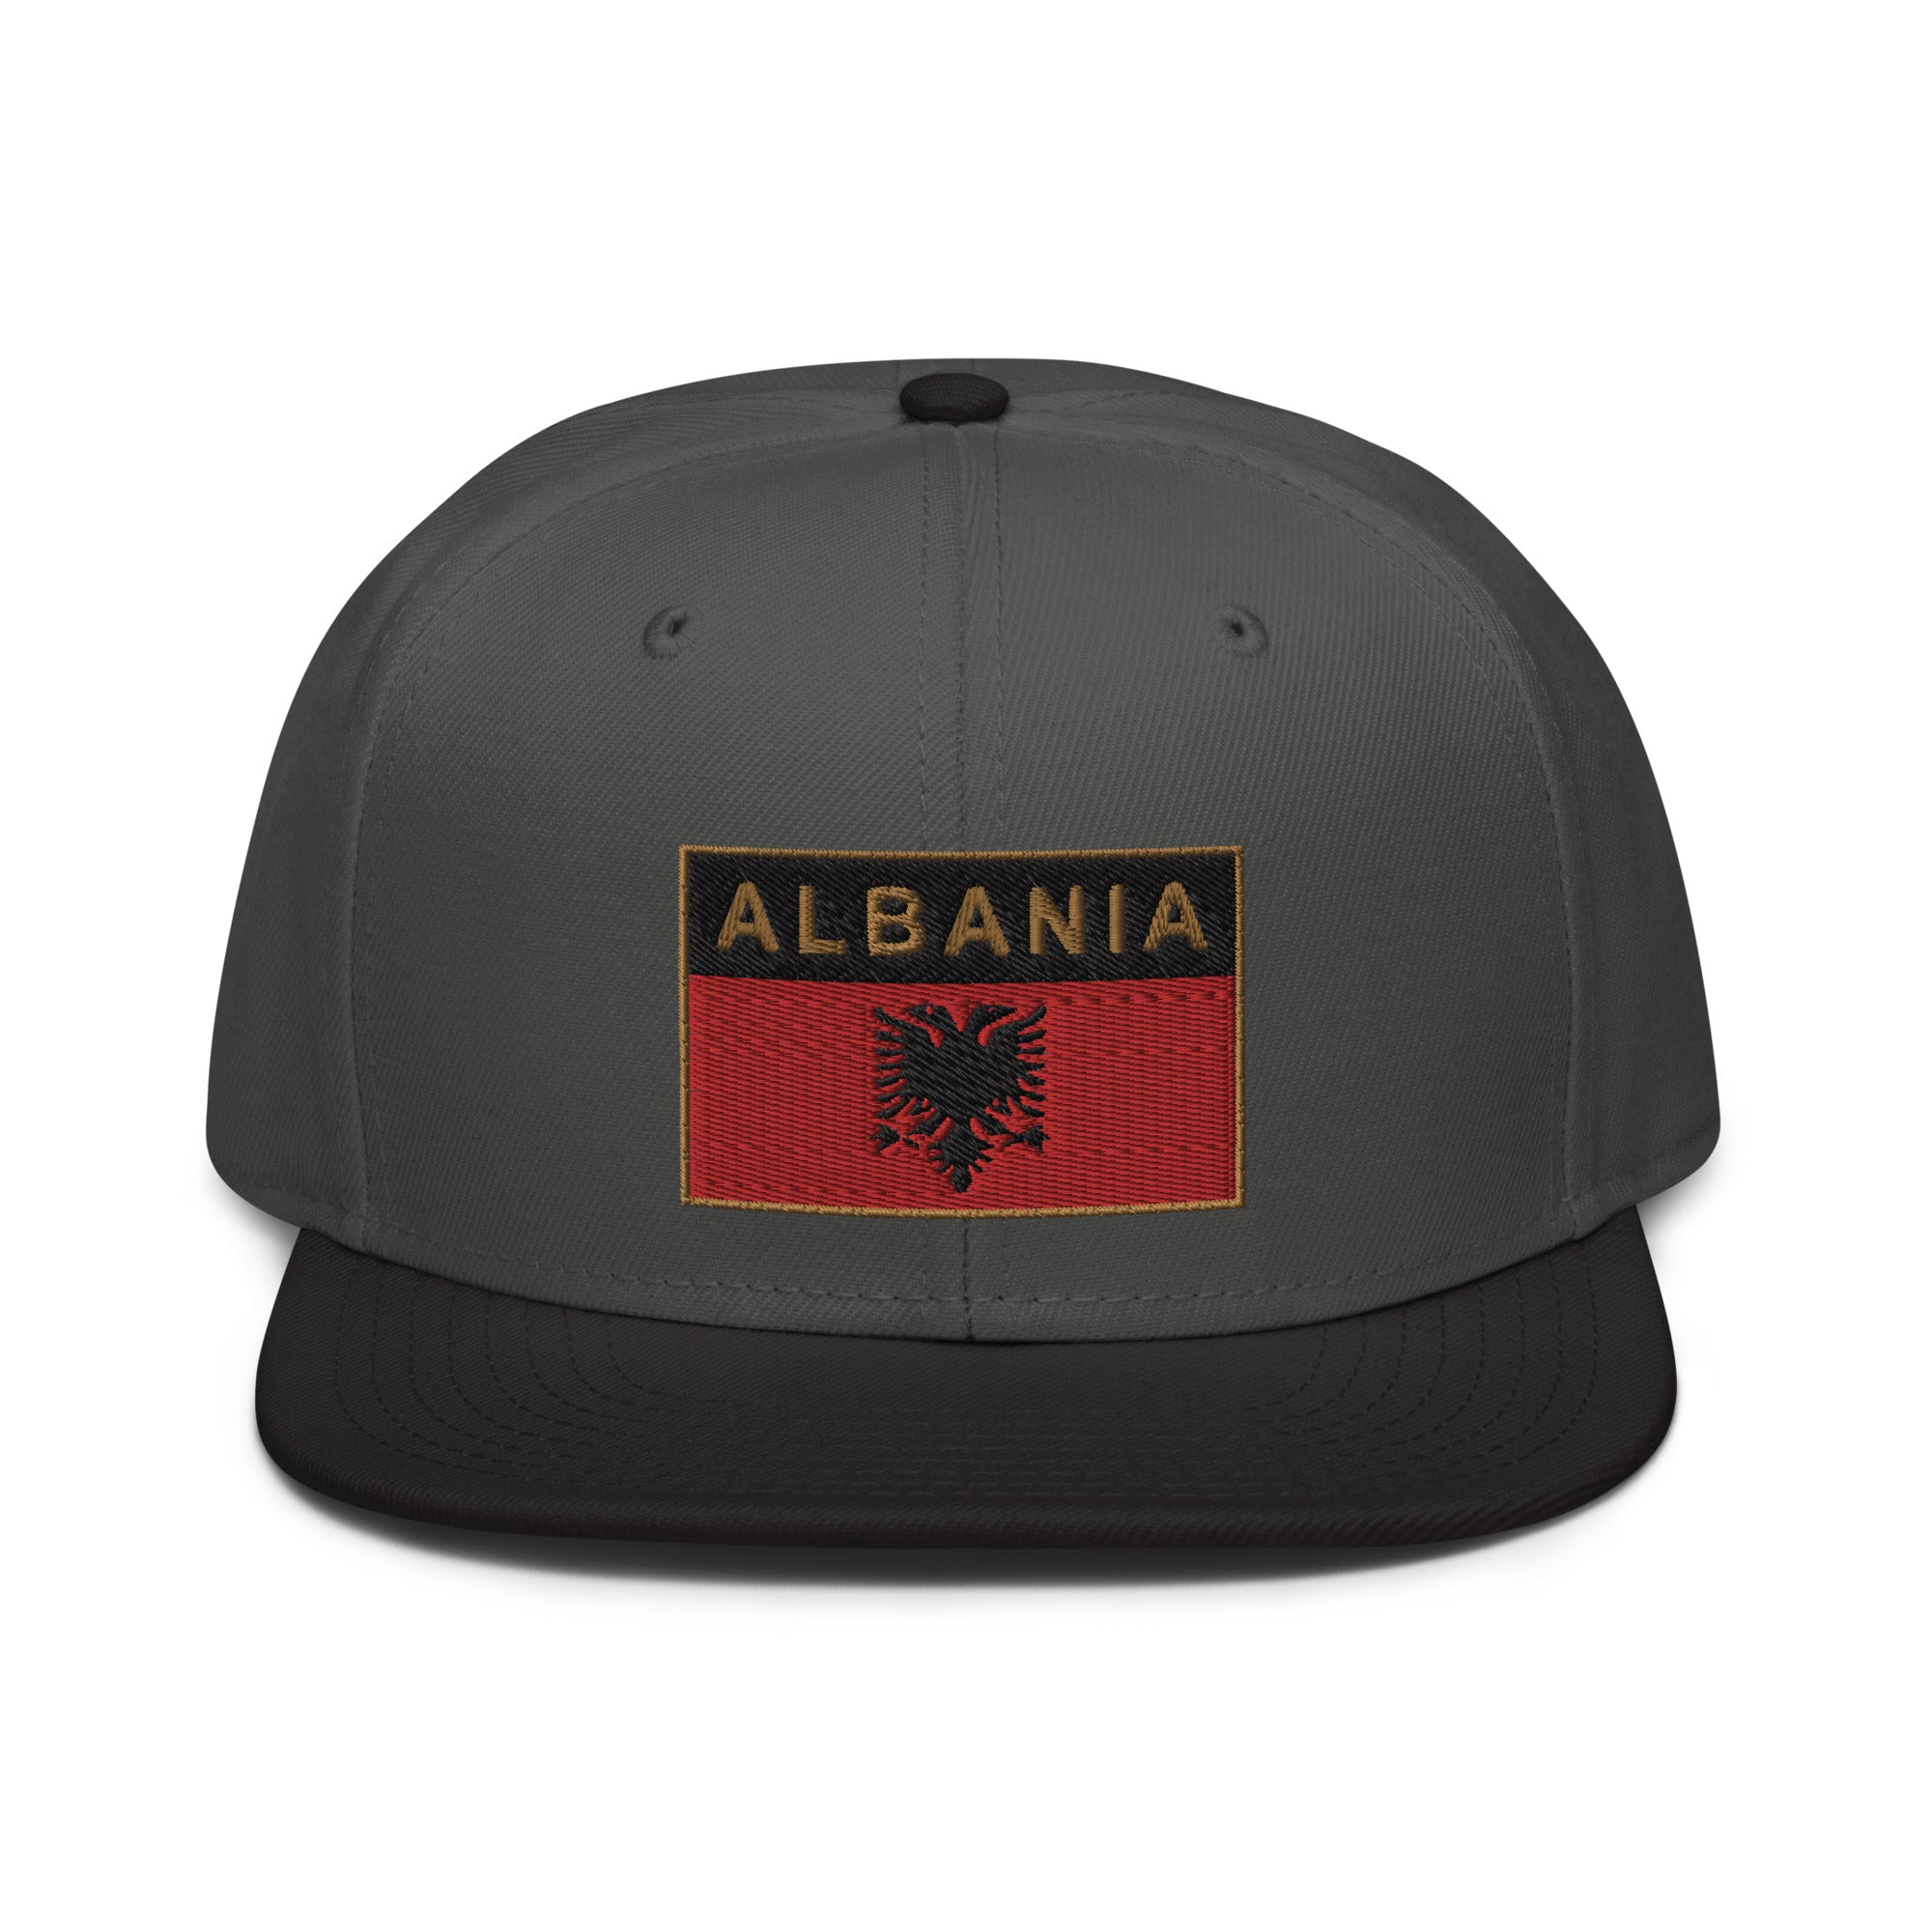 Albania military logo Embroidered patches